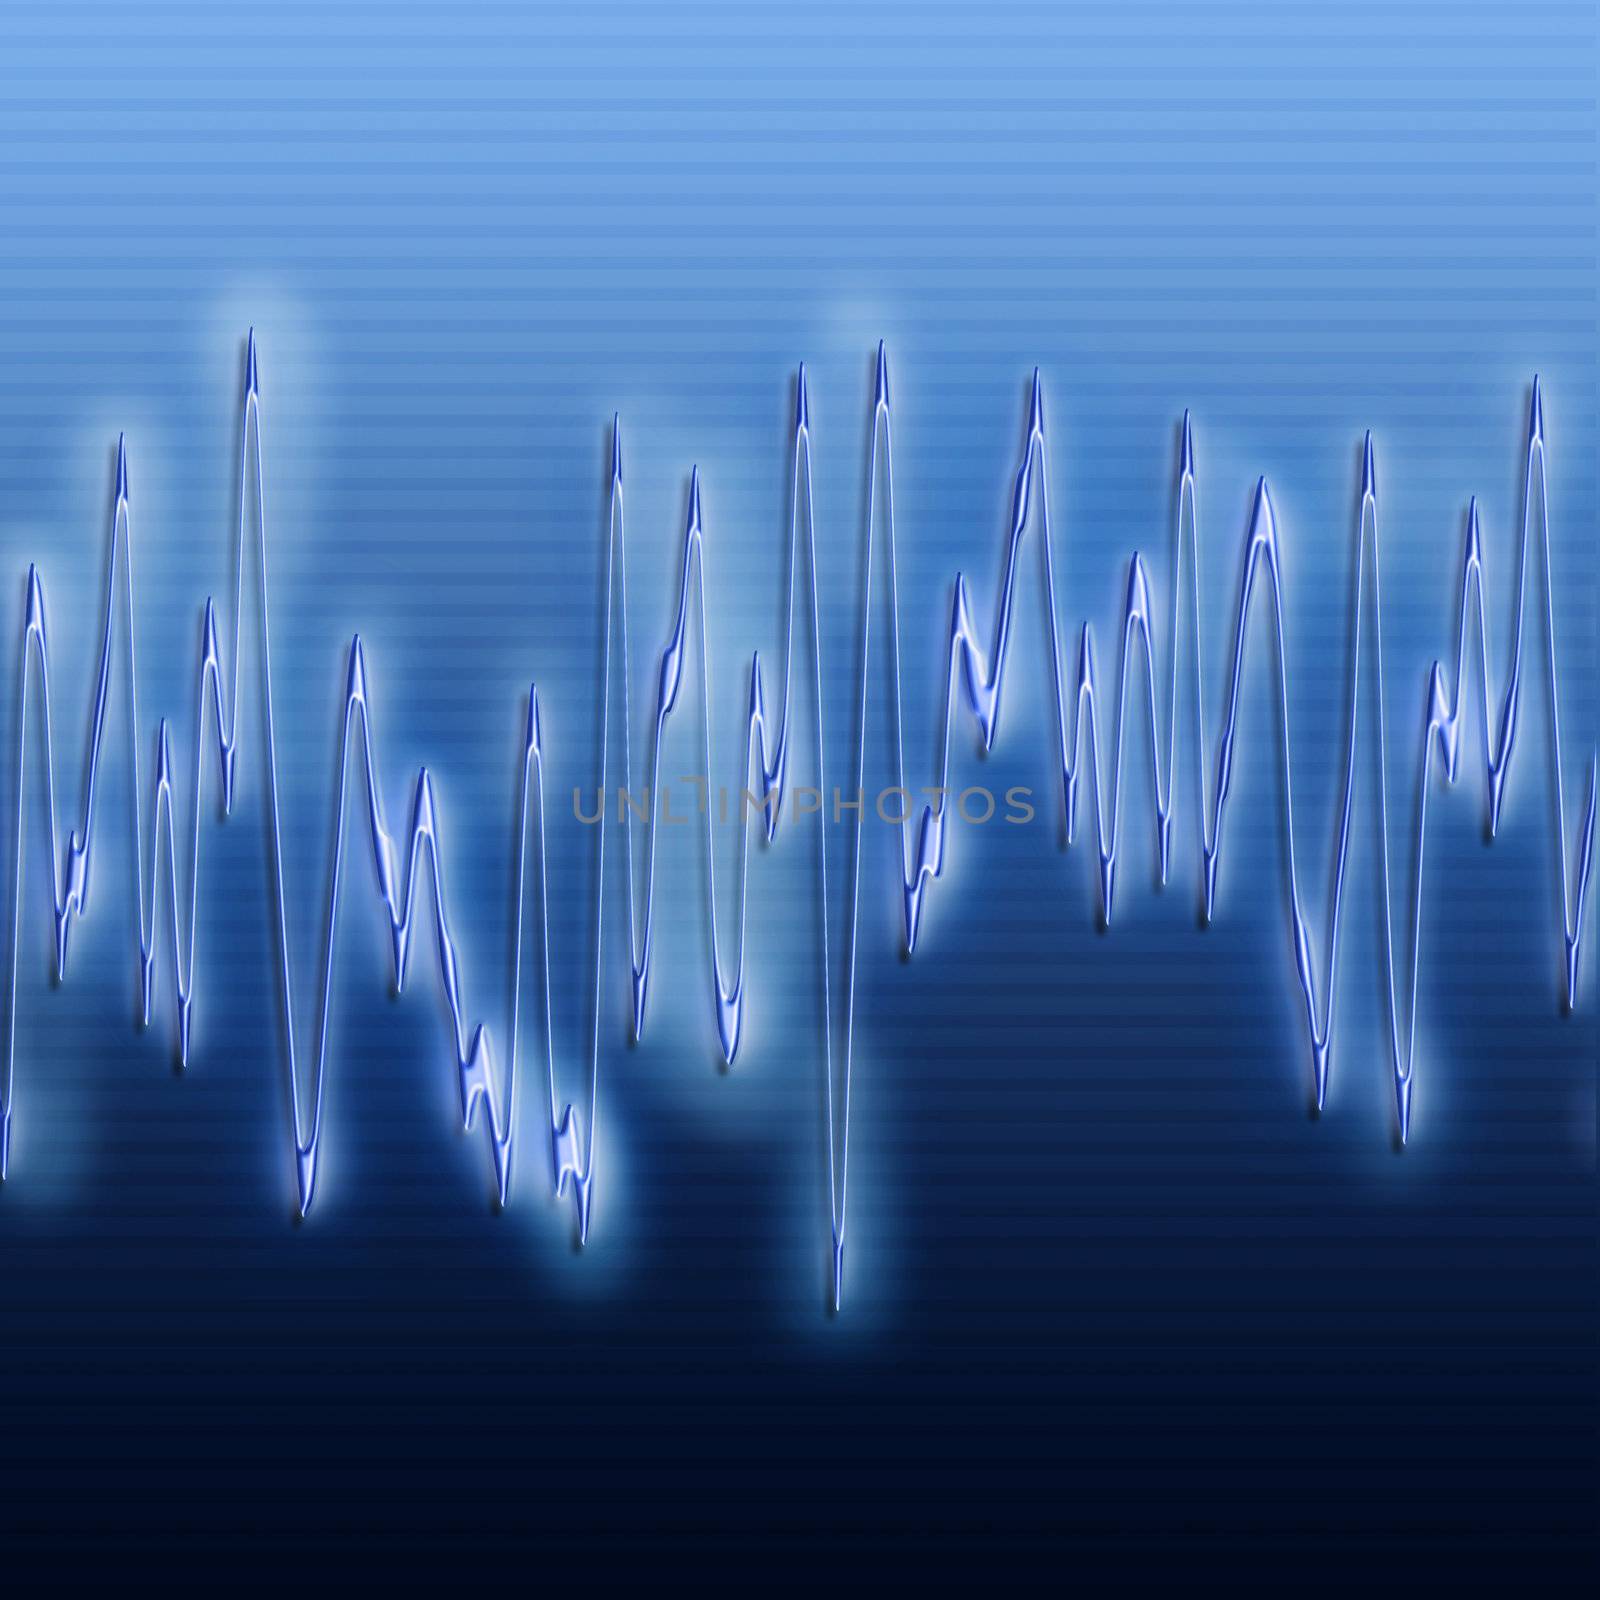 great image of very bright and glowing sound wave